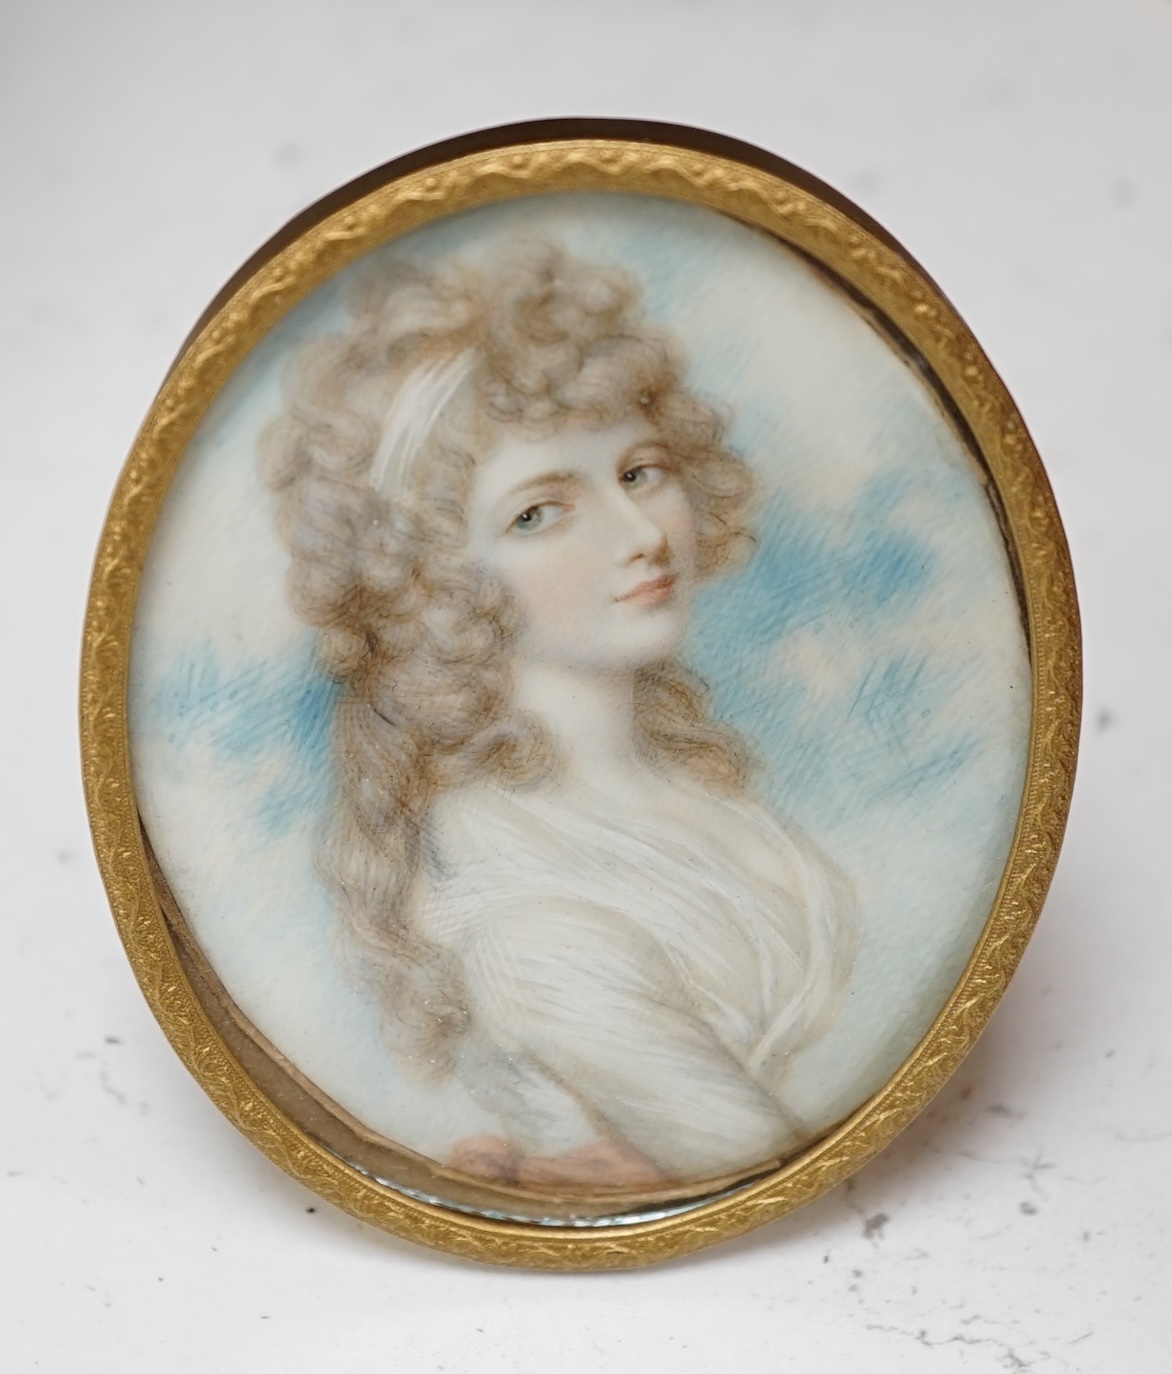 An early 19th century oval framed portrait miniature on ivory CITES Submission reference DGP5J4HH